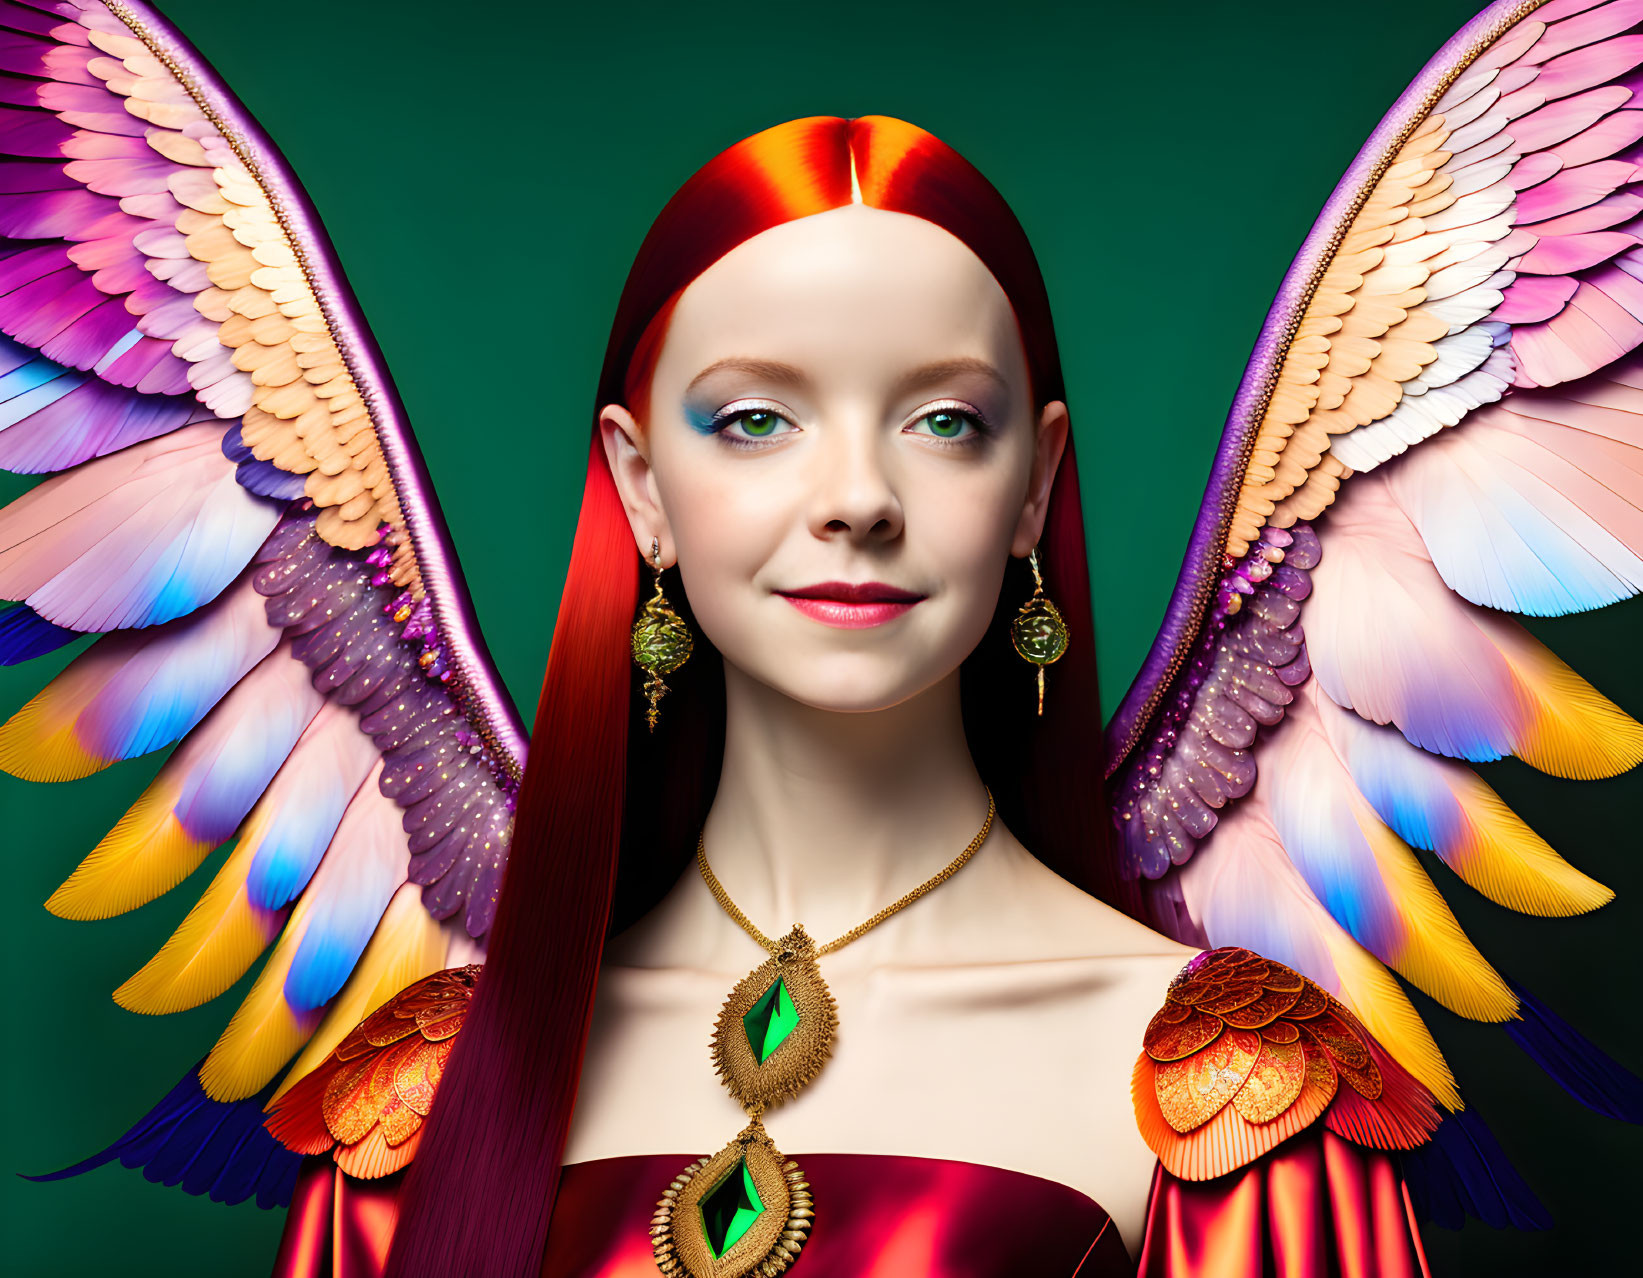 Red-haired woman with serene expression and majestic wings against green background.